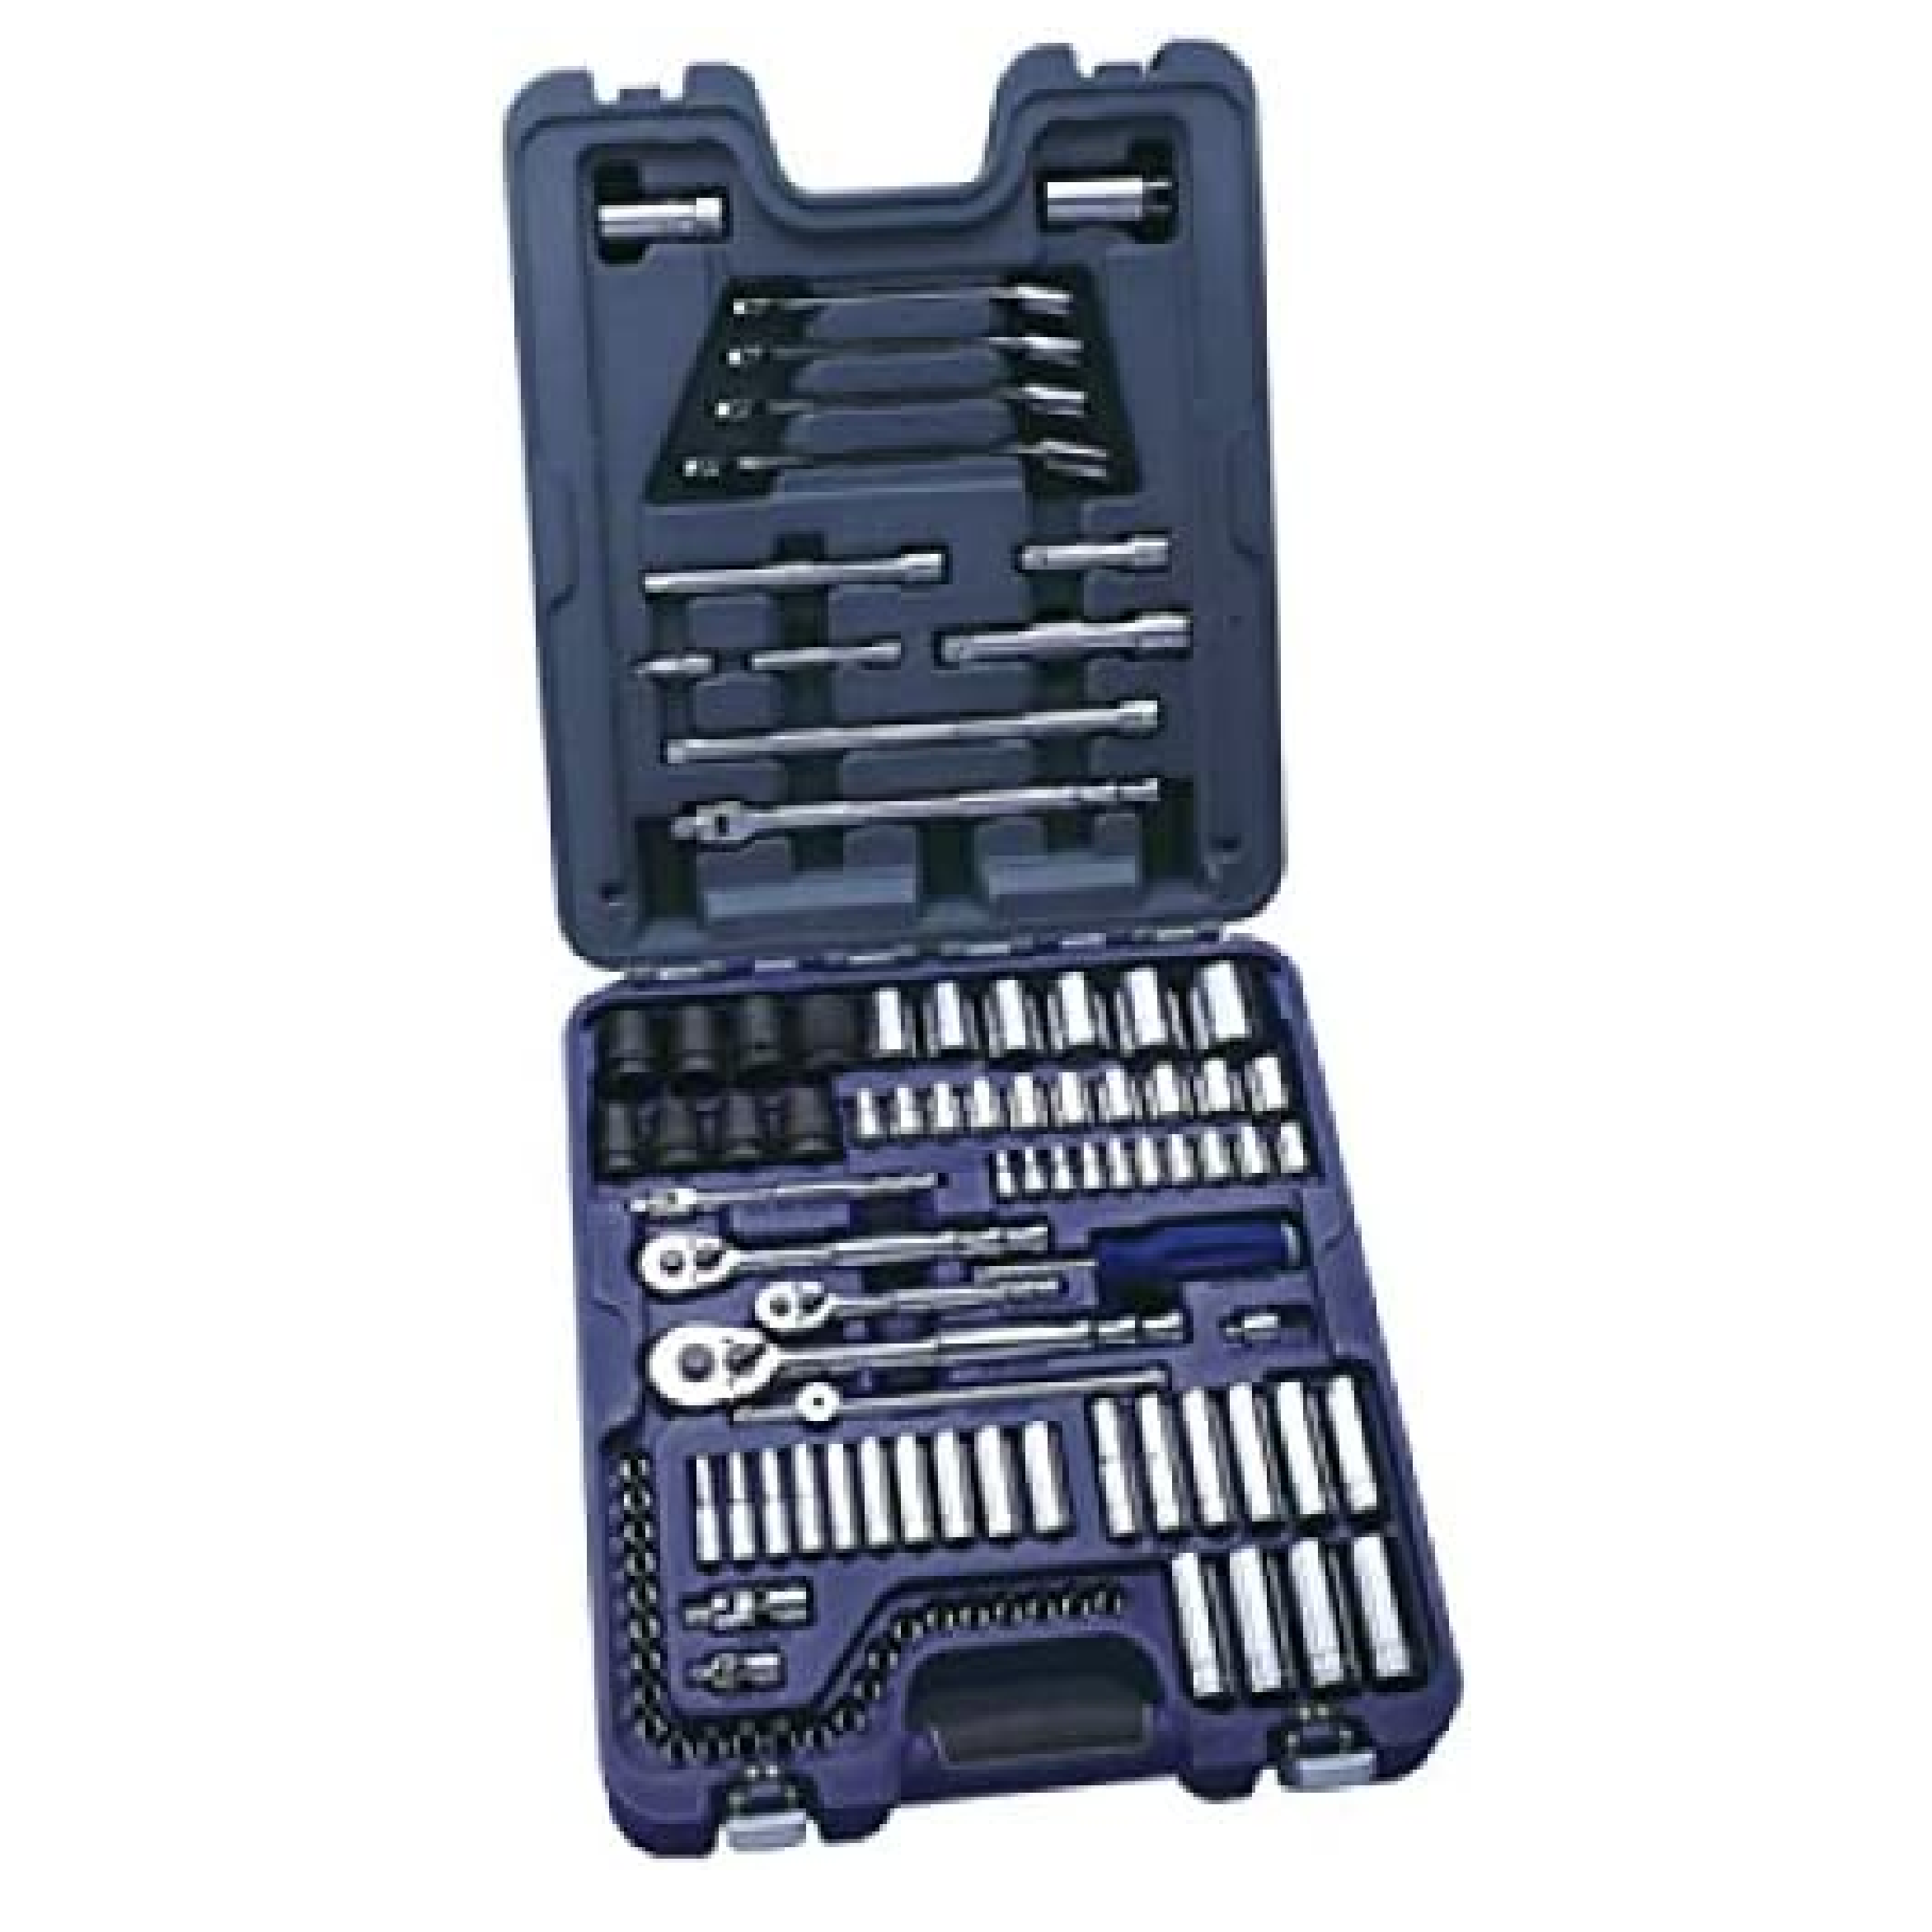 BluePoint BLPATSCM100, 100PC Socket & Wrench Set (Consists Of 1/4, 3/8 And 1/2 DR. Tools)